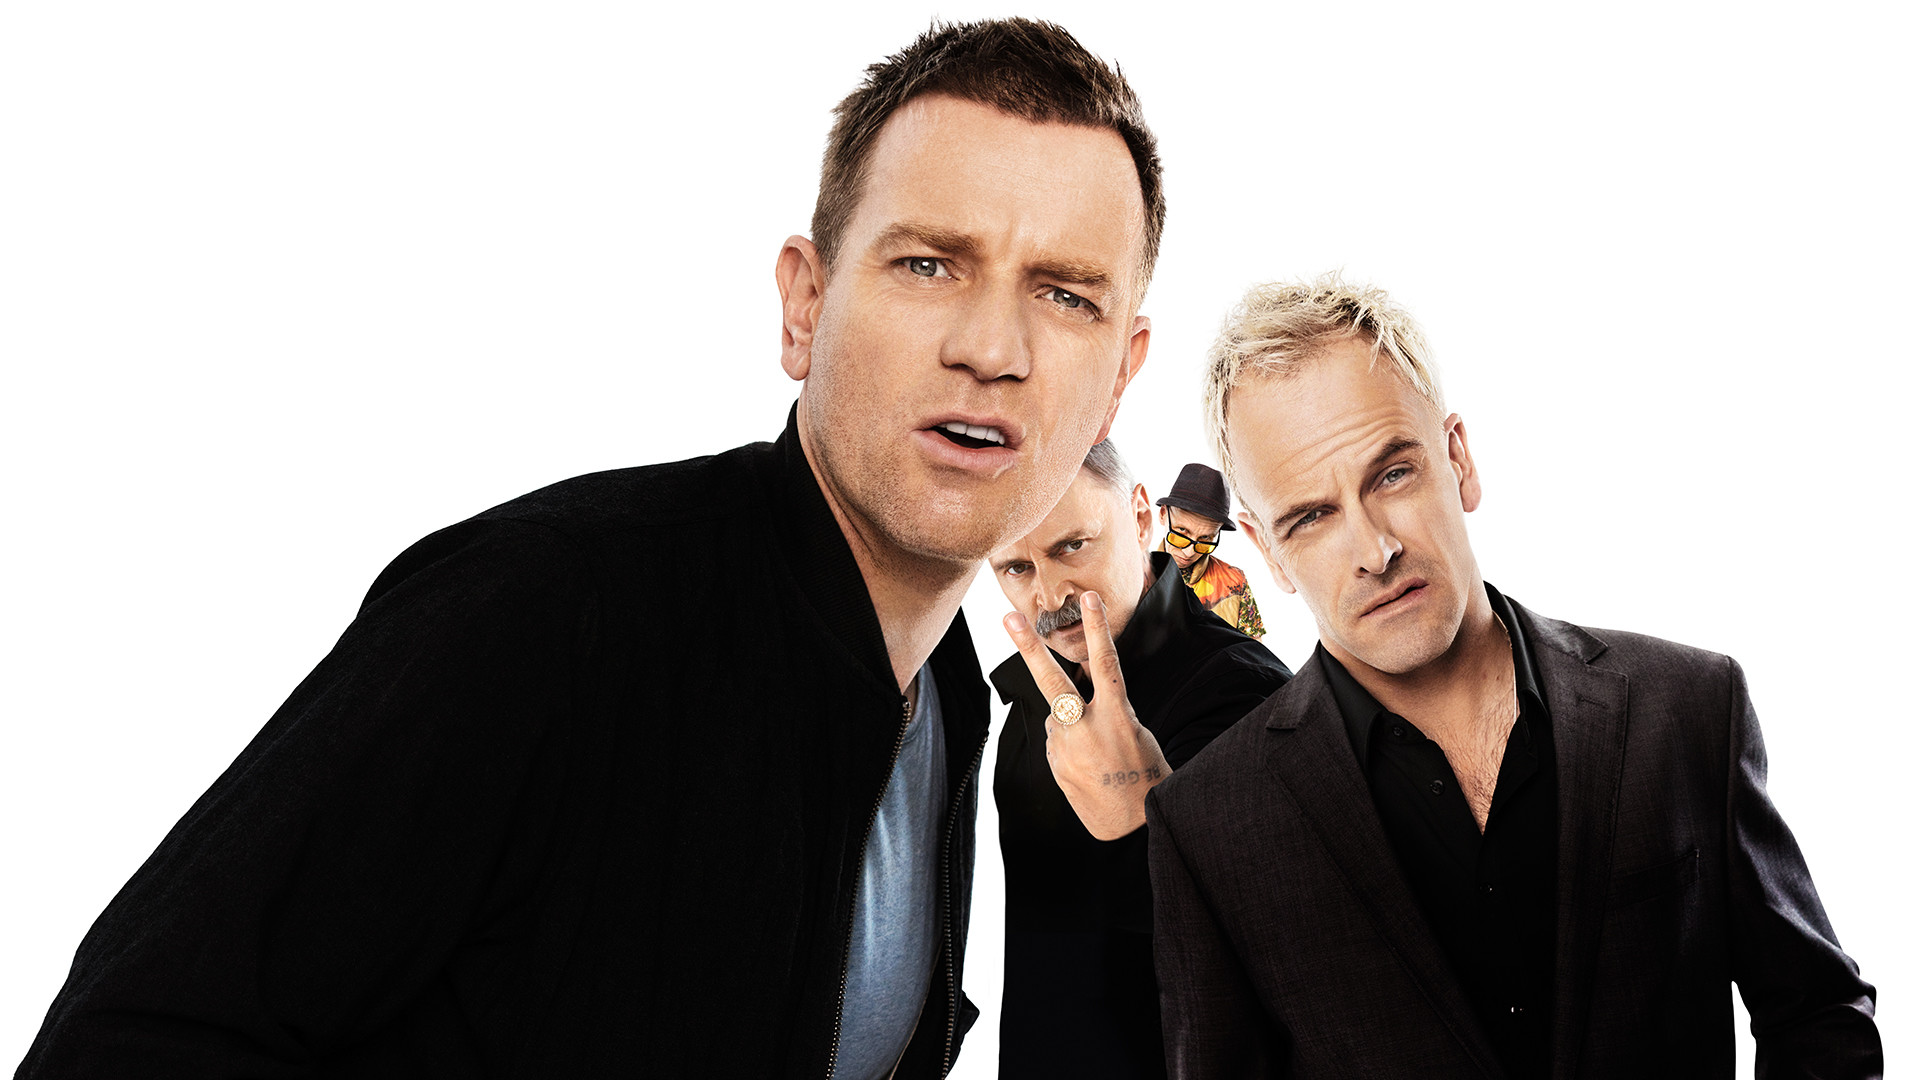 1920x1080 T2: Trainspotting HD Wallpaper | Background Image |  | ID:817503 -  Wallpaper Abyss